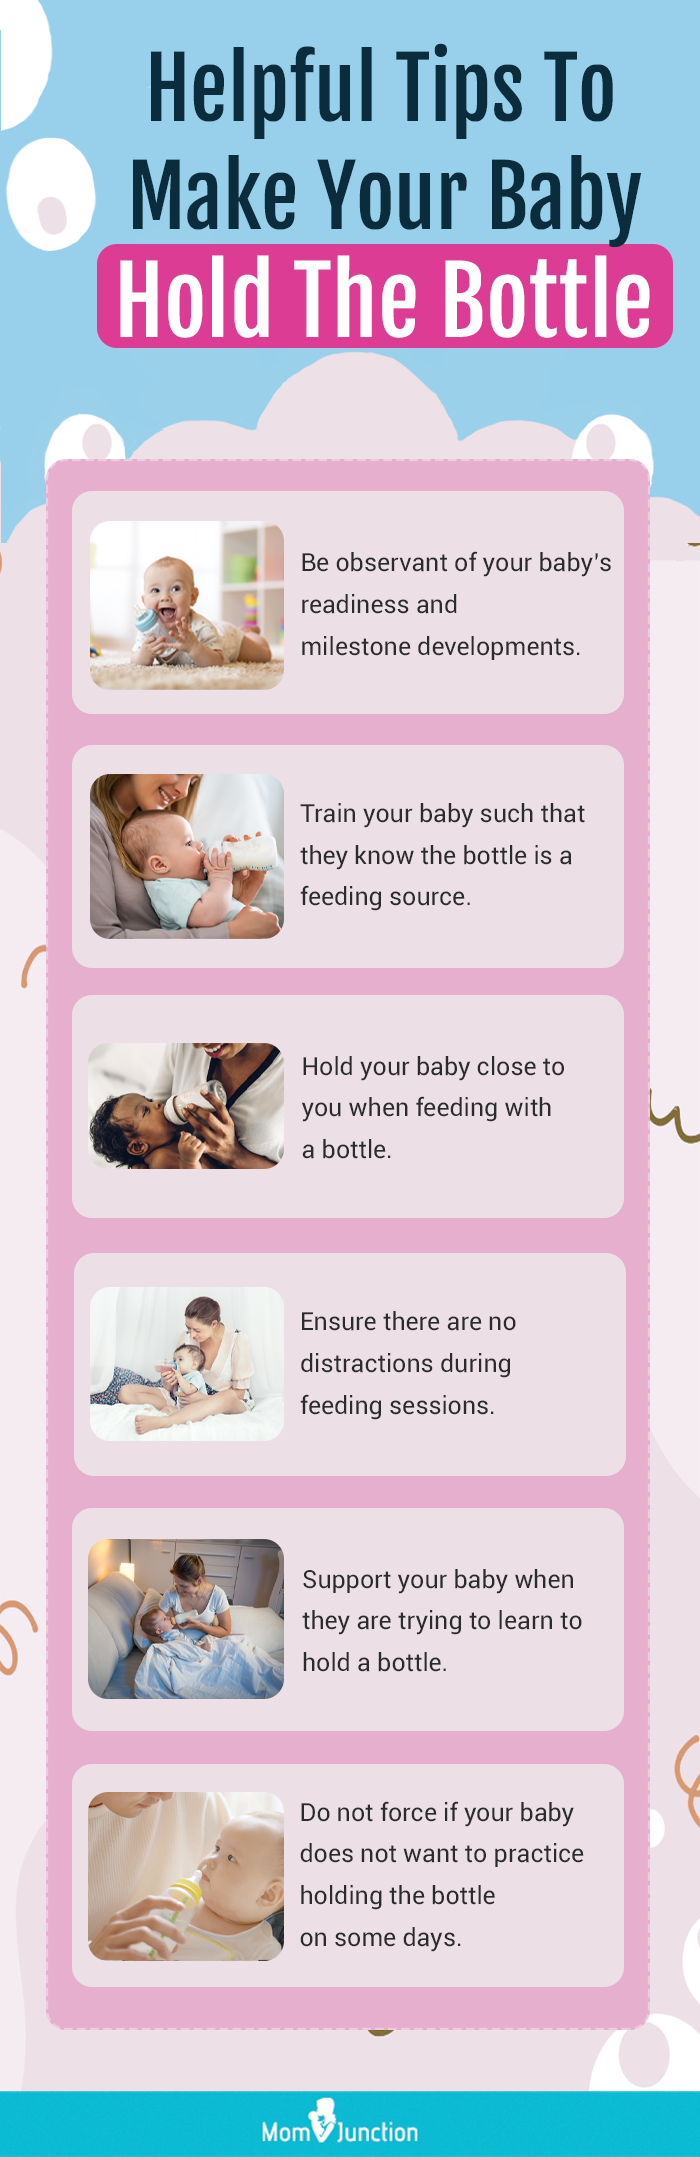 helpful tips to make your baby hold the bottle (infographic)